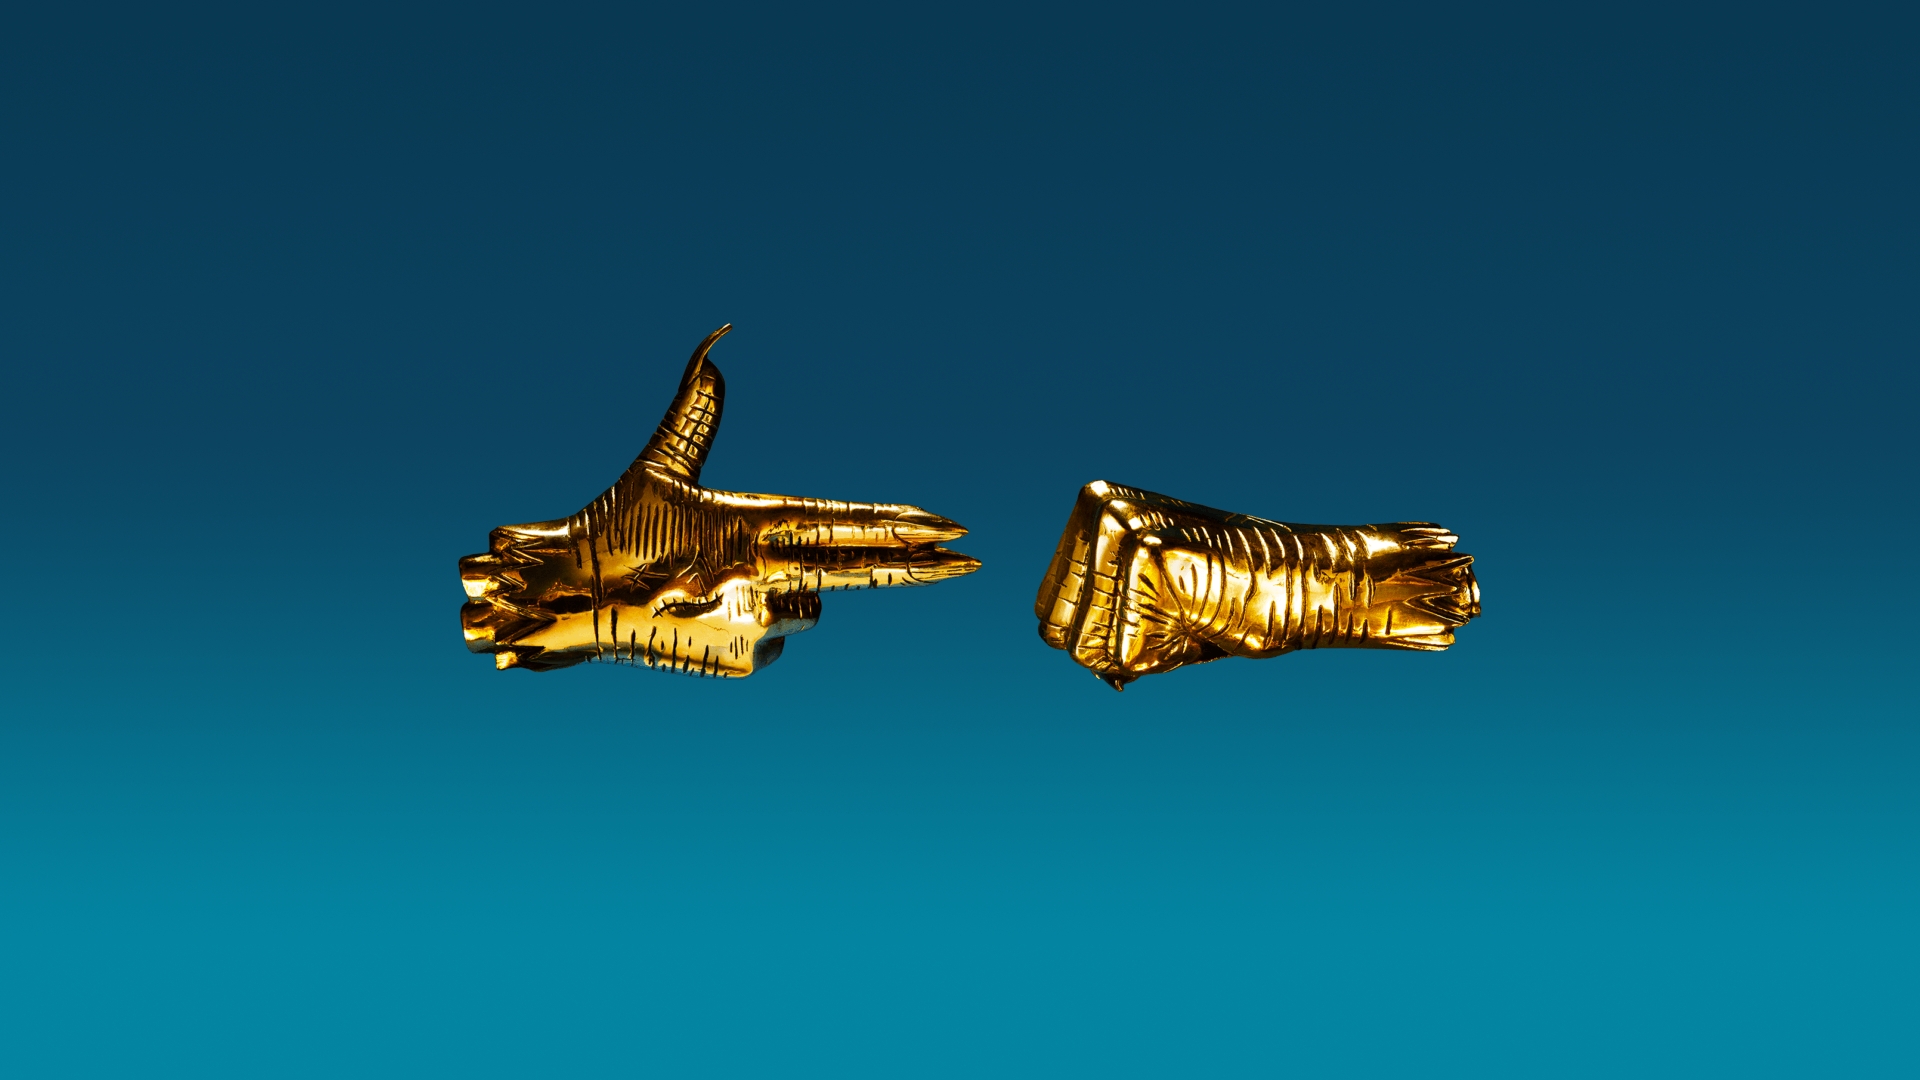 Rtj Desktop And Mobile Wallpaper S Run The Jewels